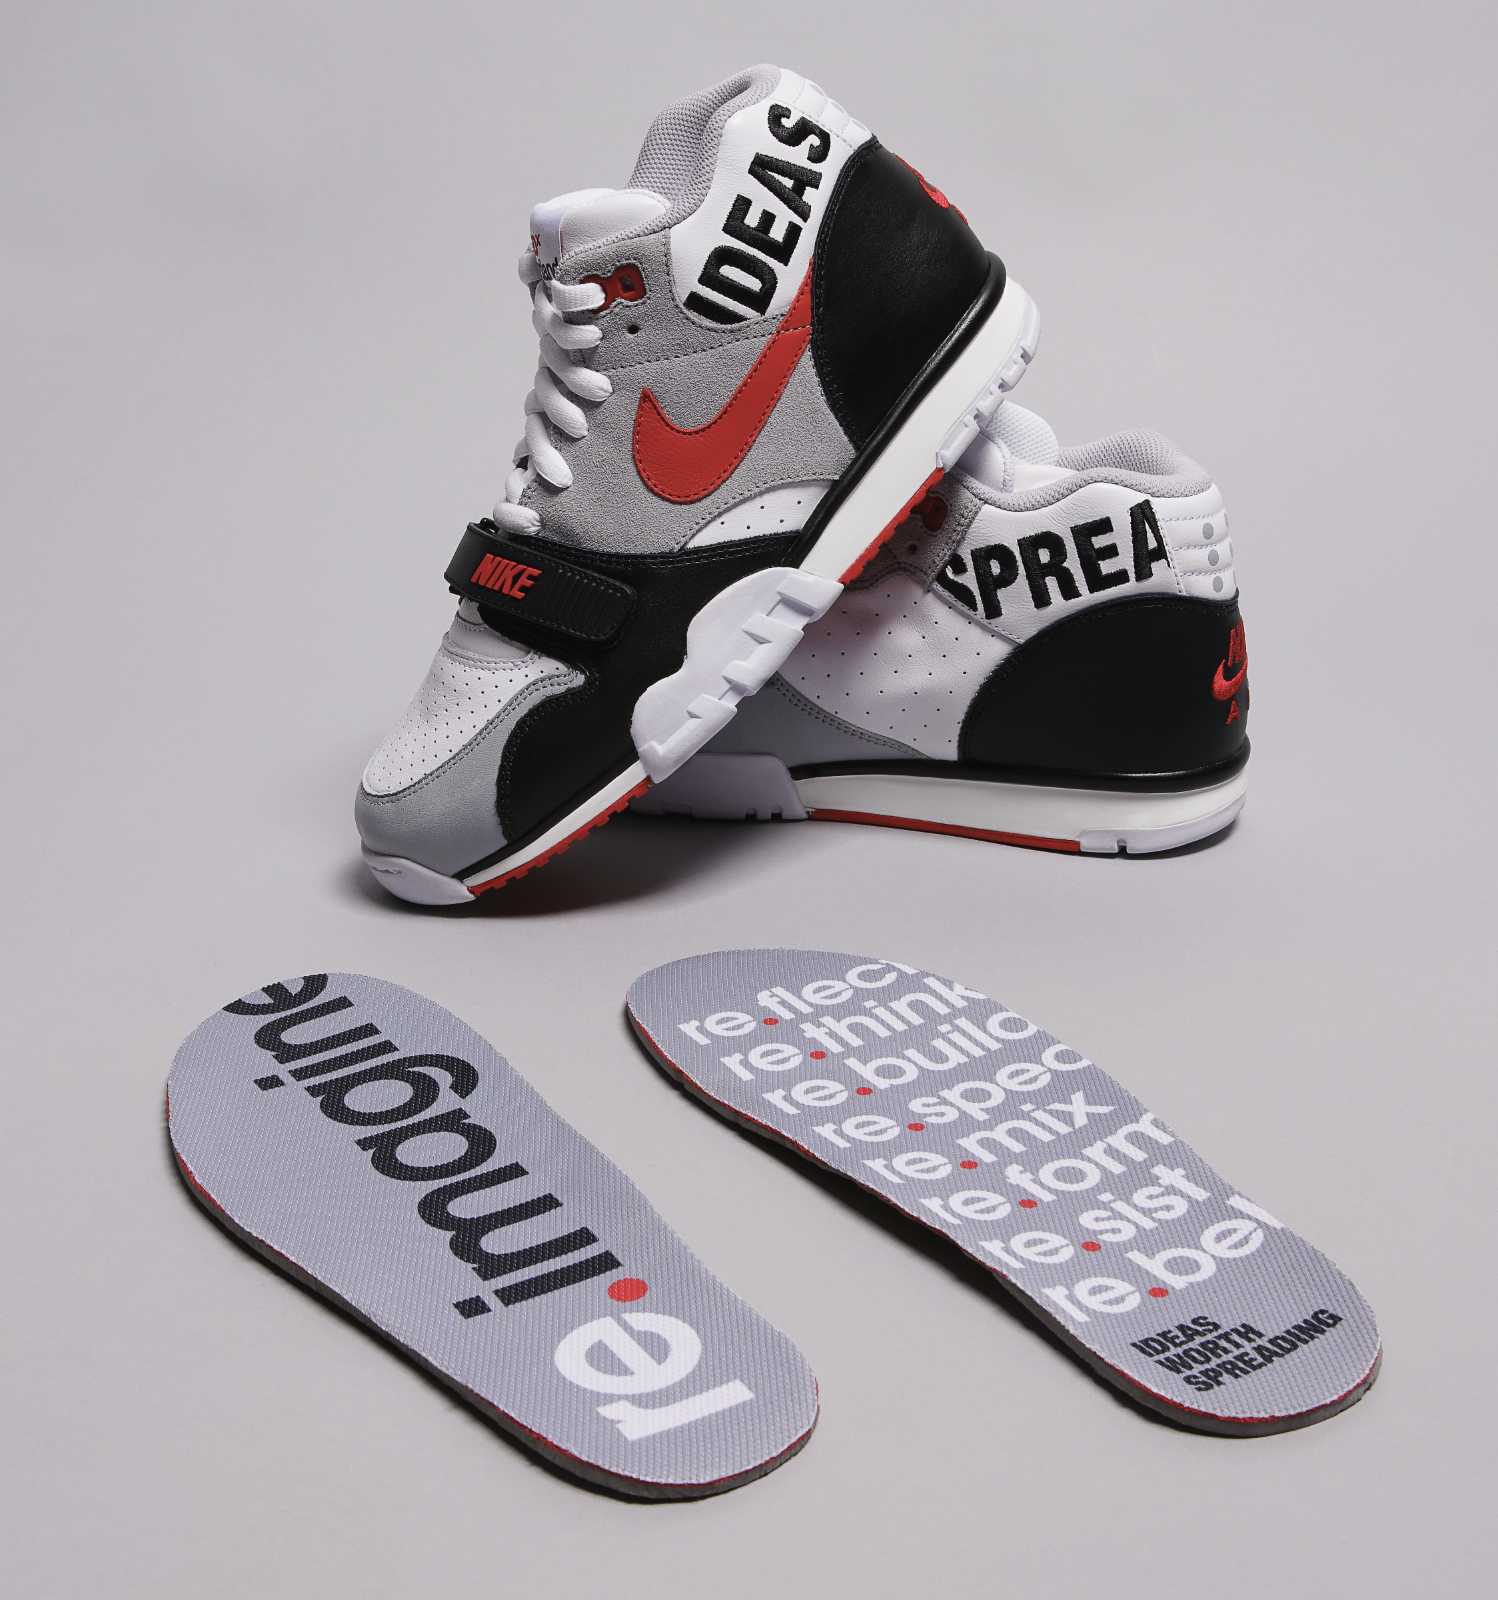 TEDxPortland x Nike Air Trainer 1 Auction Insoles